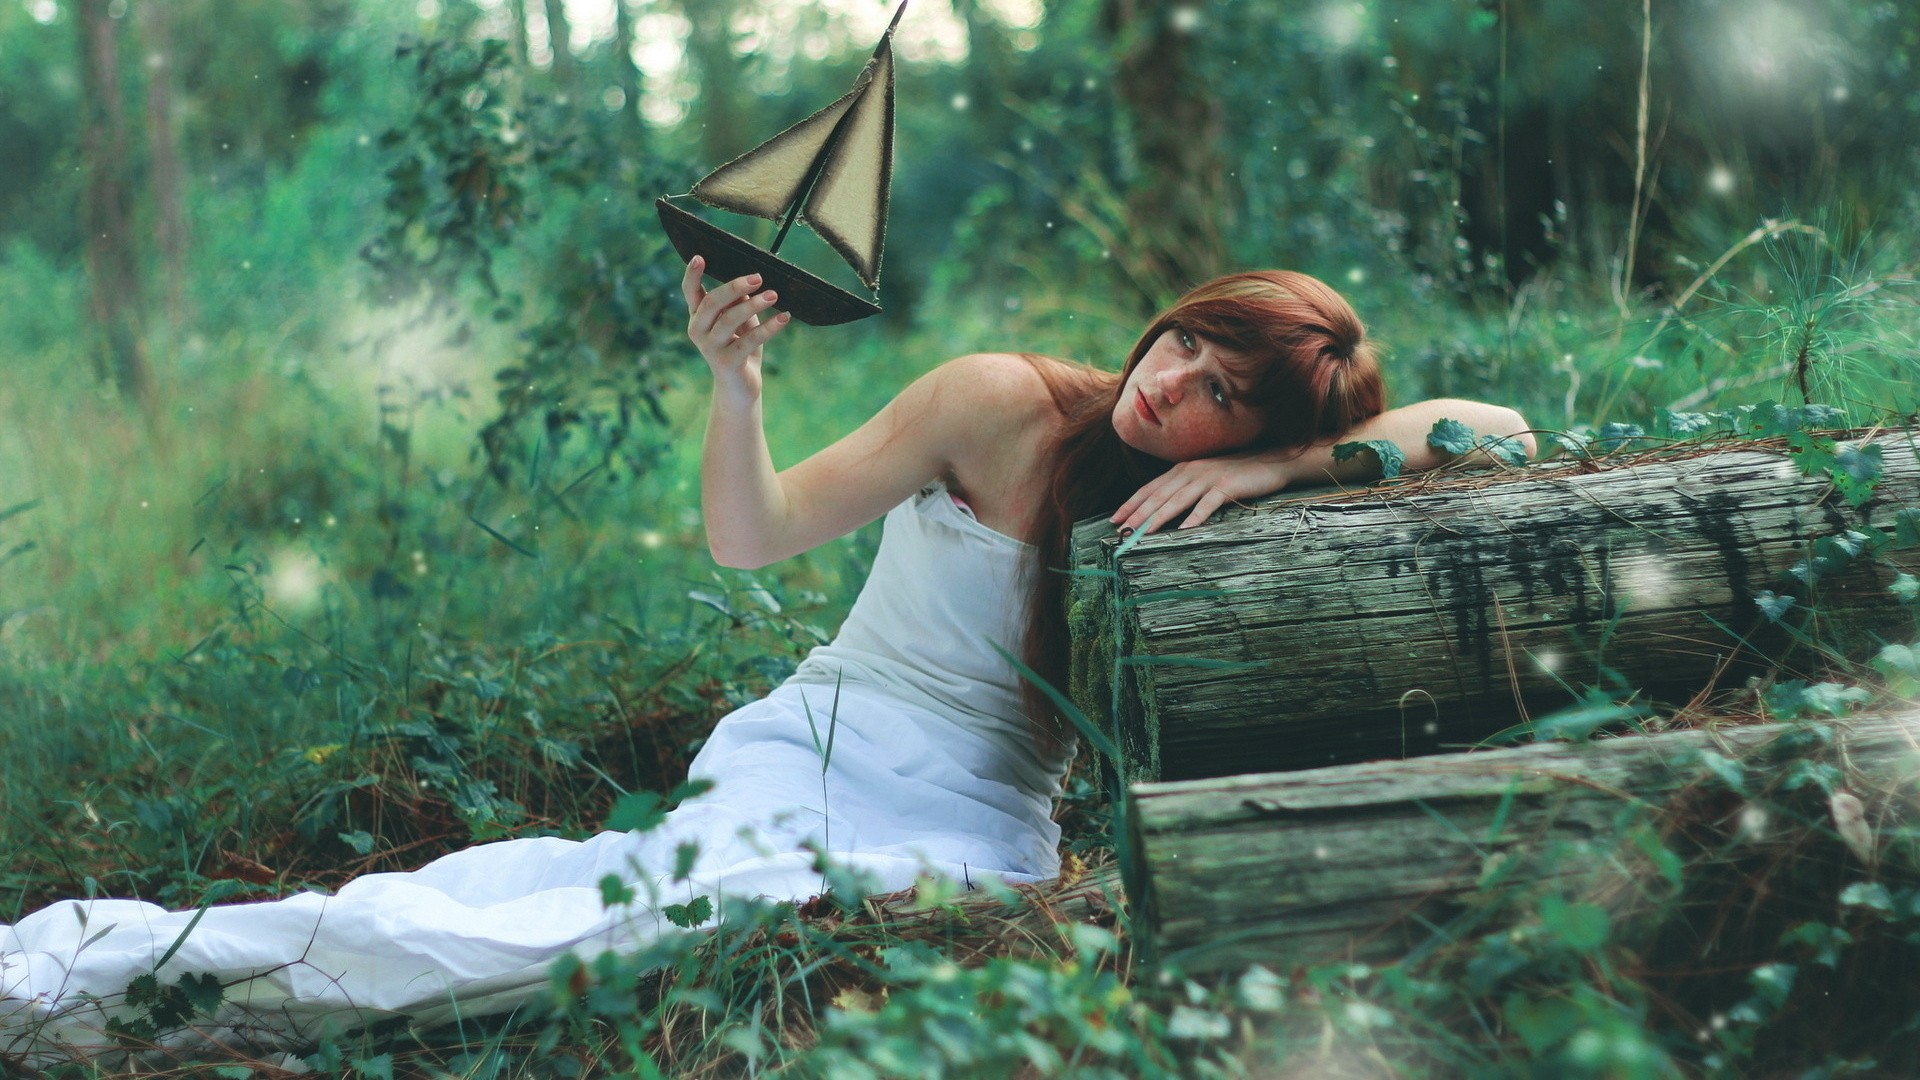 People 1920x1080 women model redhead long hair women outdoors nature wood trees field freckles white dress bare shoulders miniatures sailing ship sitting moss leaves plants vehicle boat toys white clothing